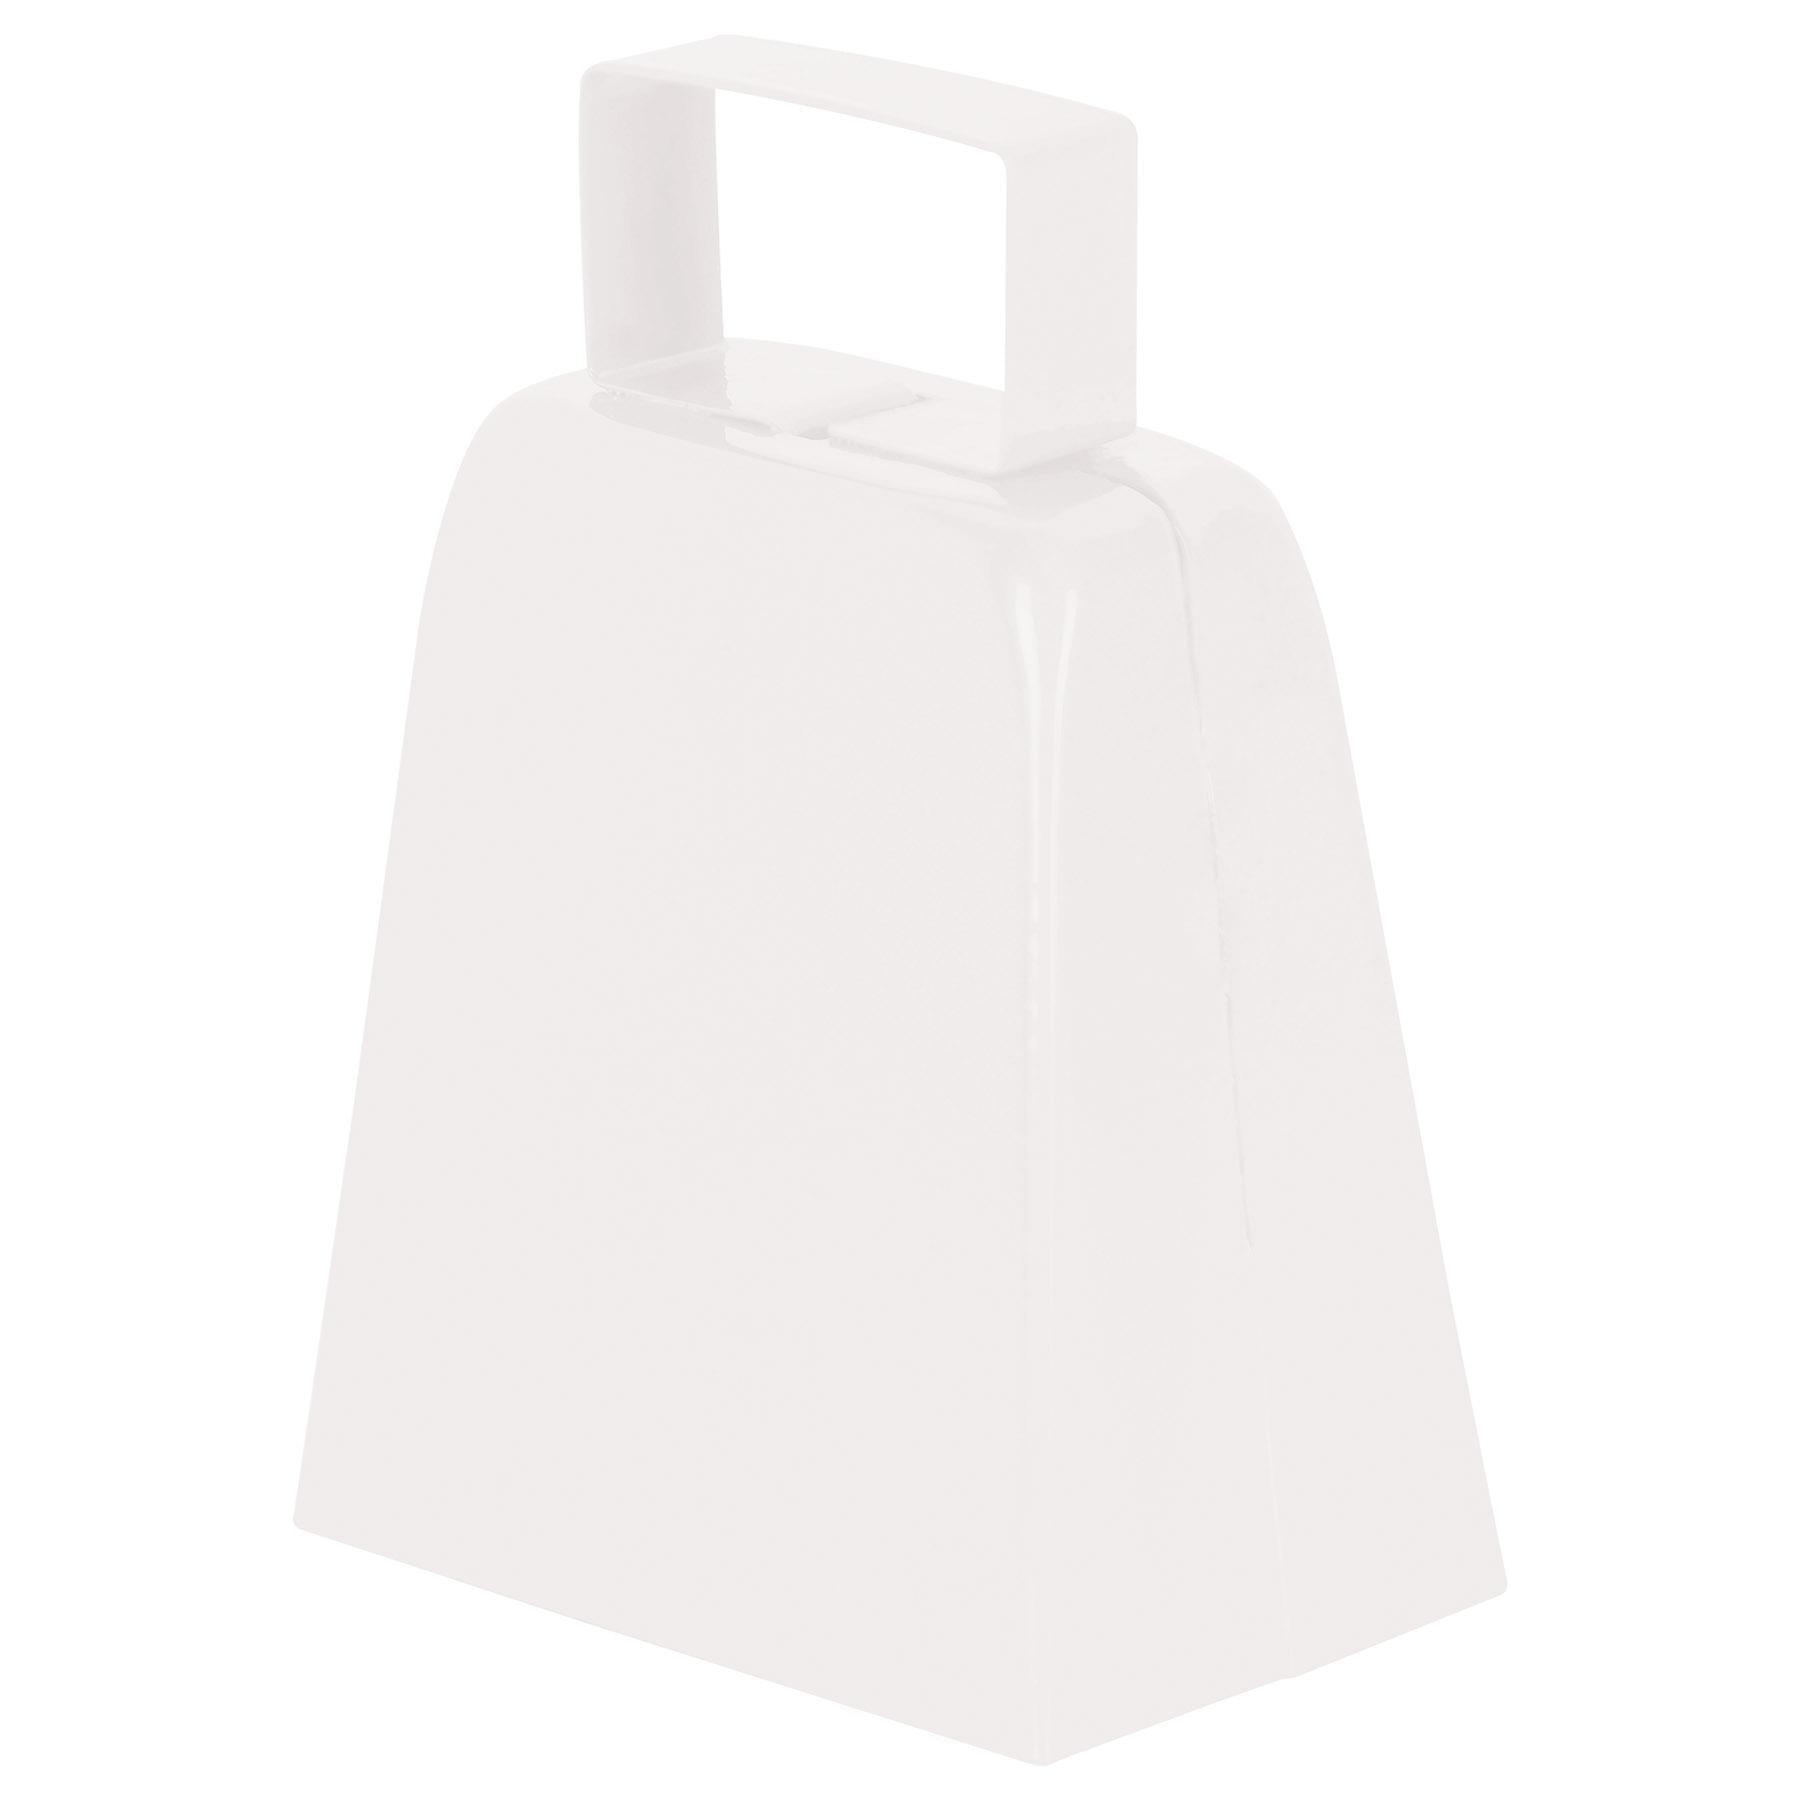 Beistle Party Cowbells - white